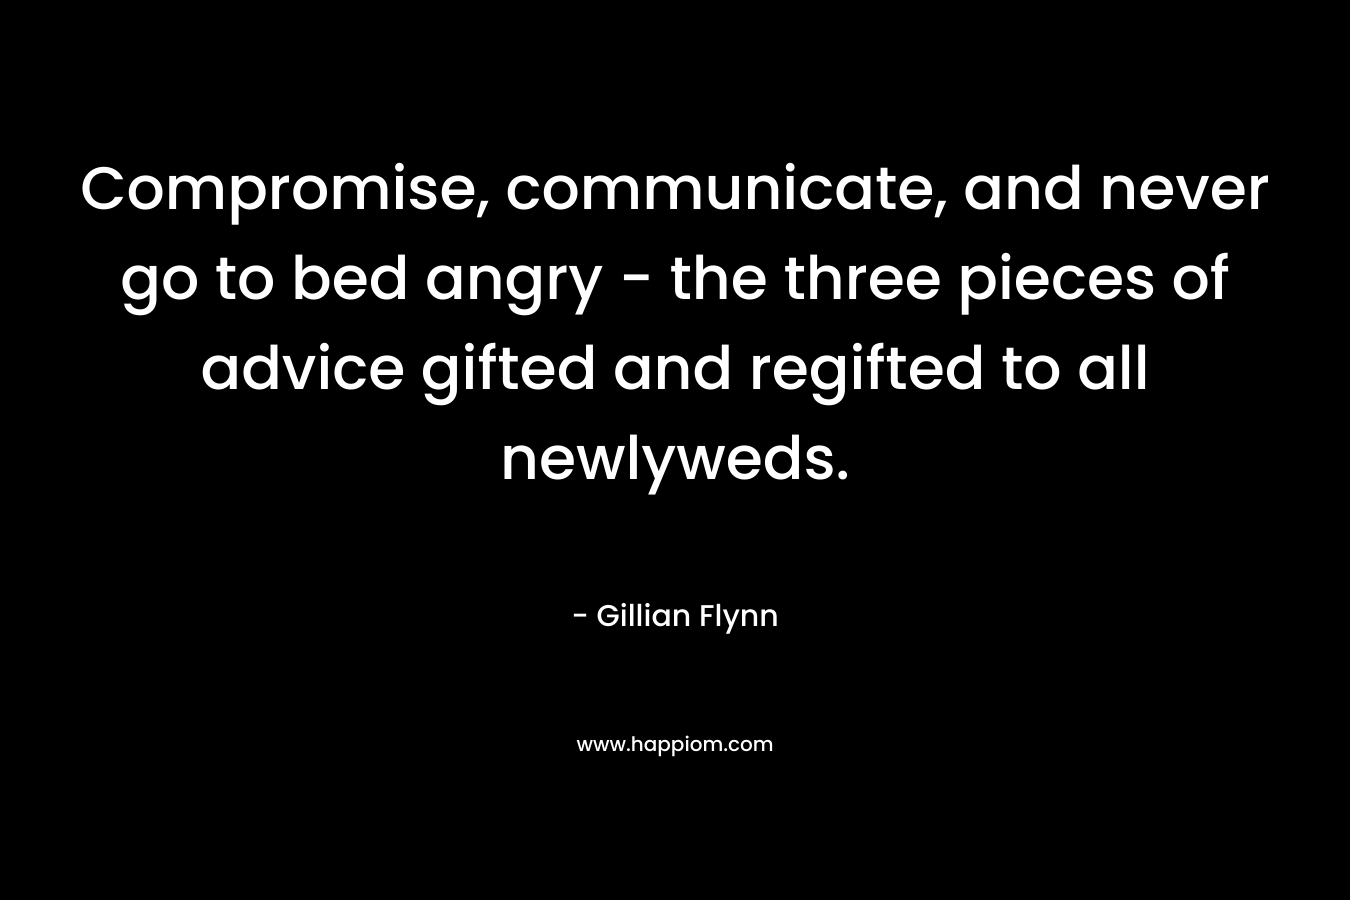 Compromise, communicate, and never go to bed angry – the three pieces of advice gifted and regifted to all newlyweds. – Gillian Flynn